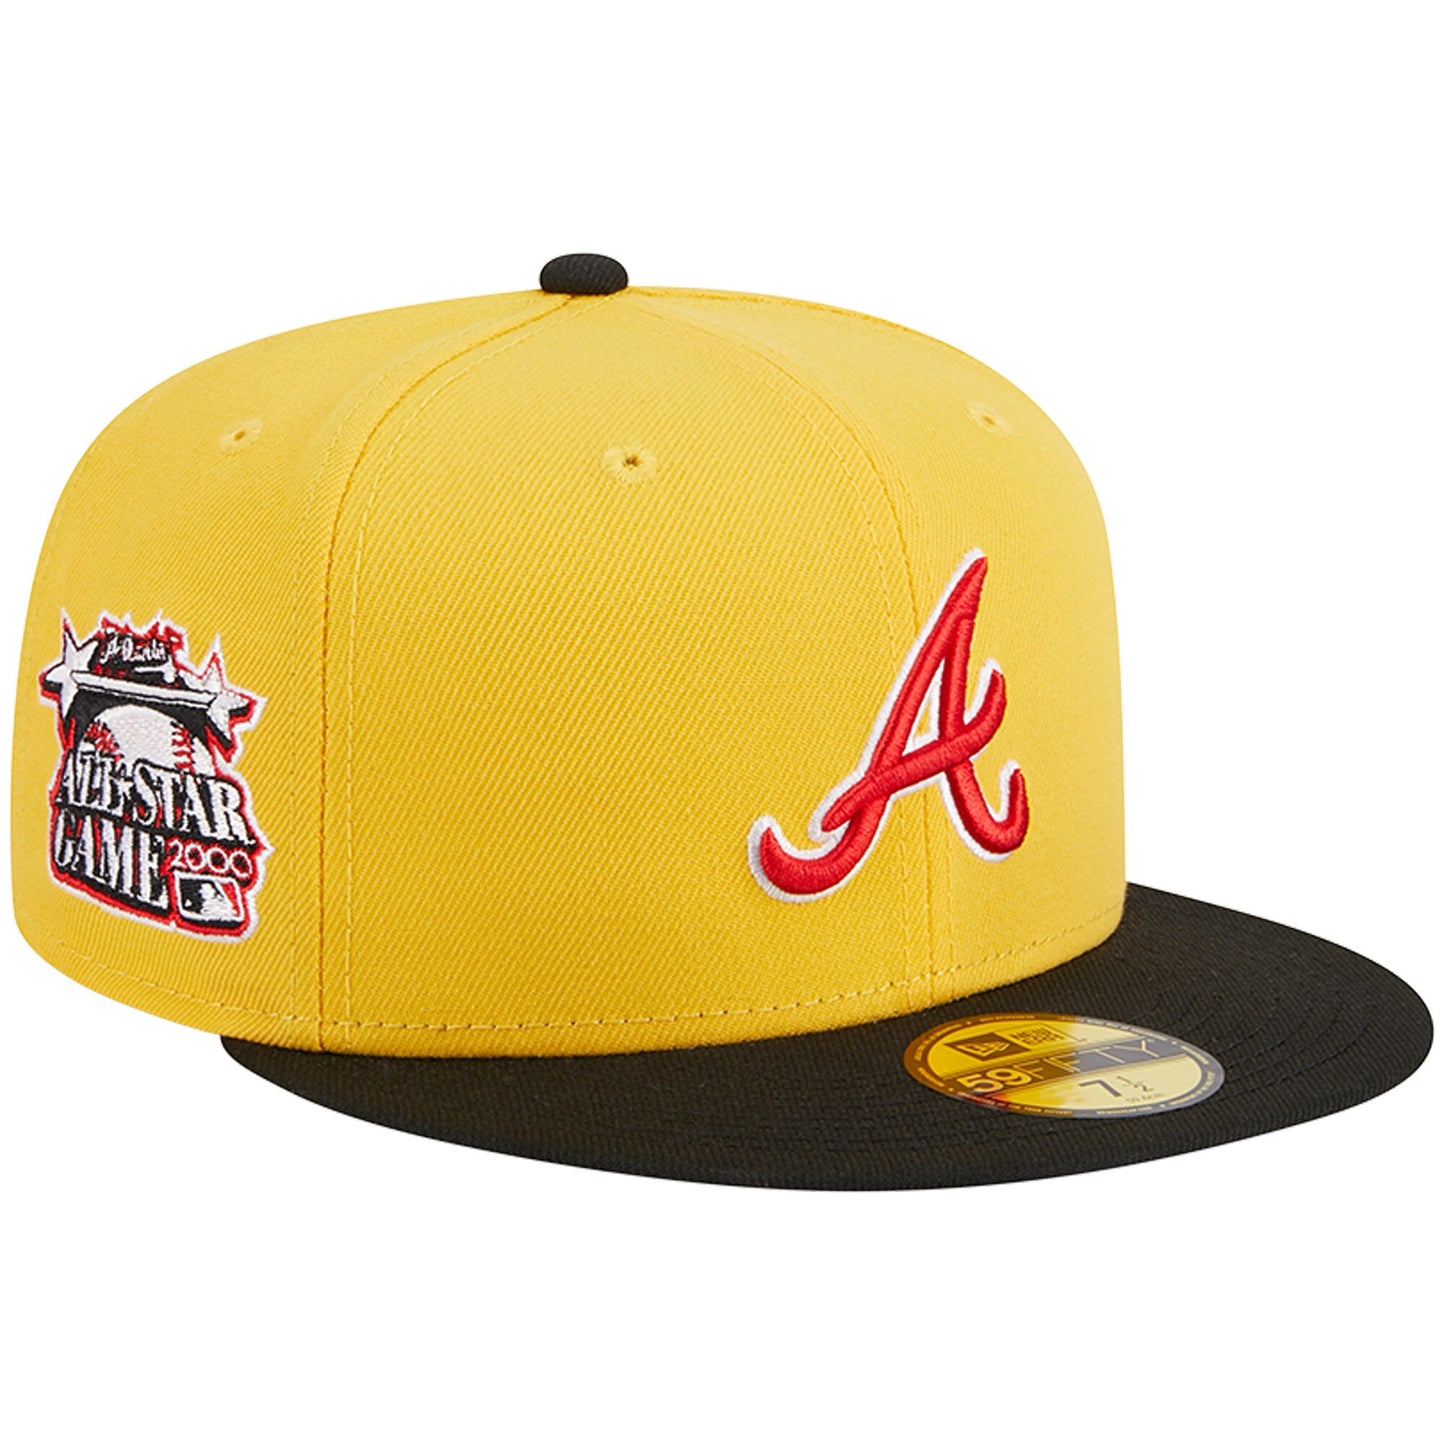 Atlanta Braves New Era Grilled 59FIFTY Fitted Hat - Yellow/Black